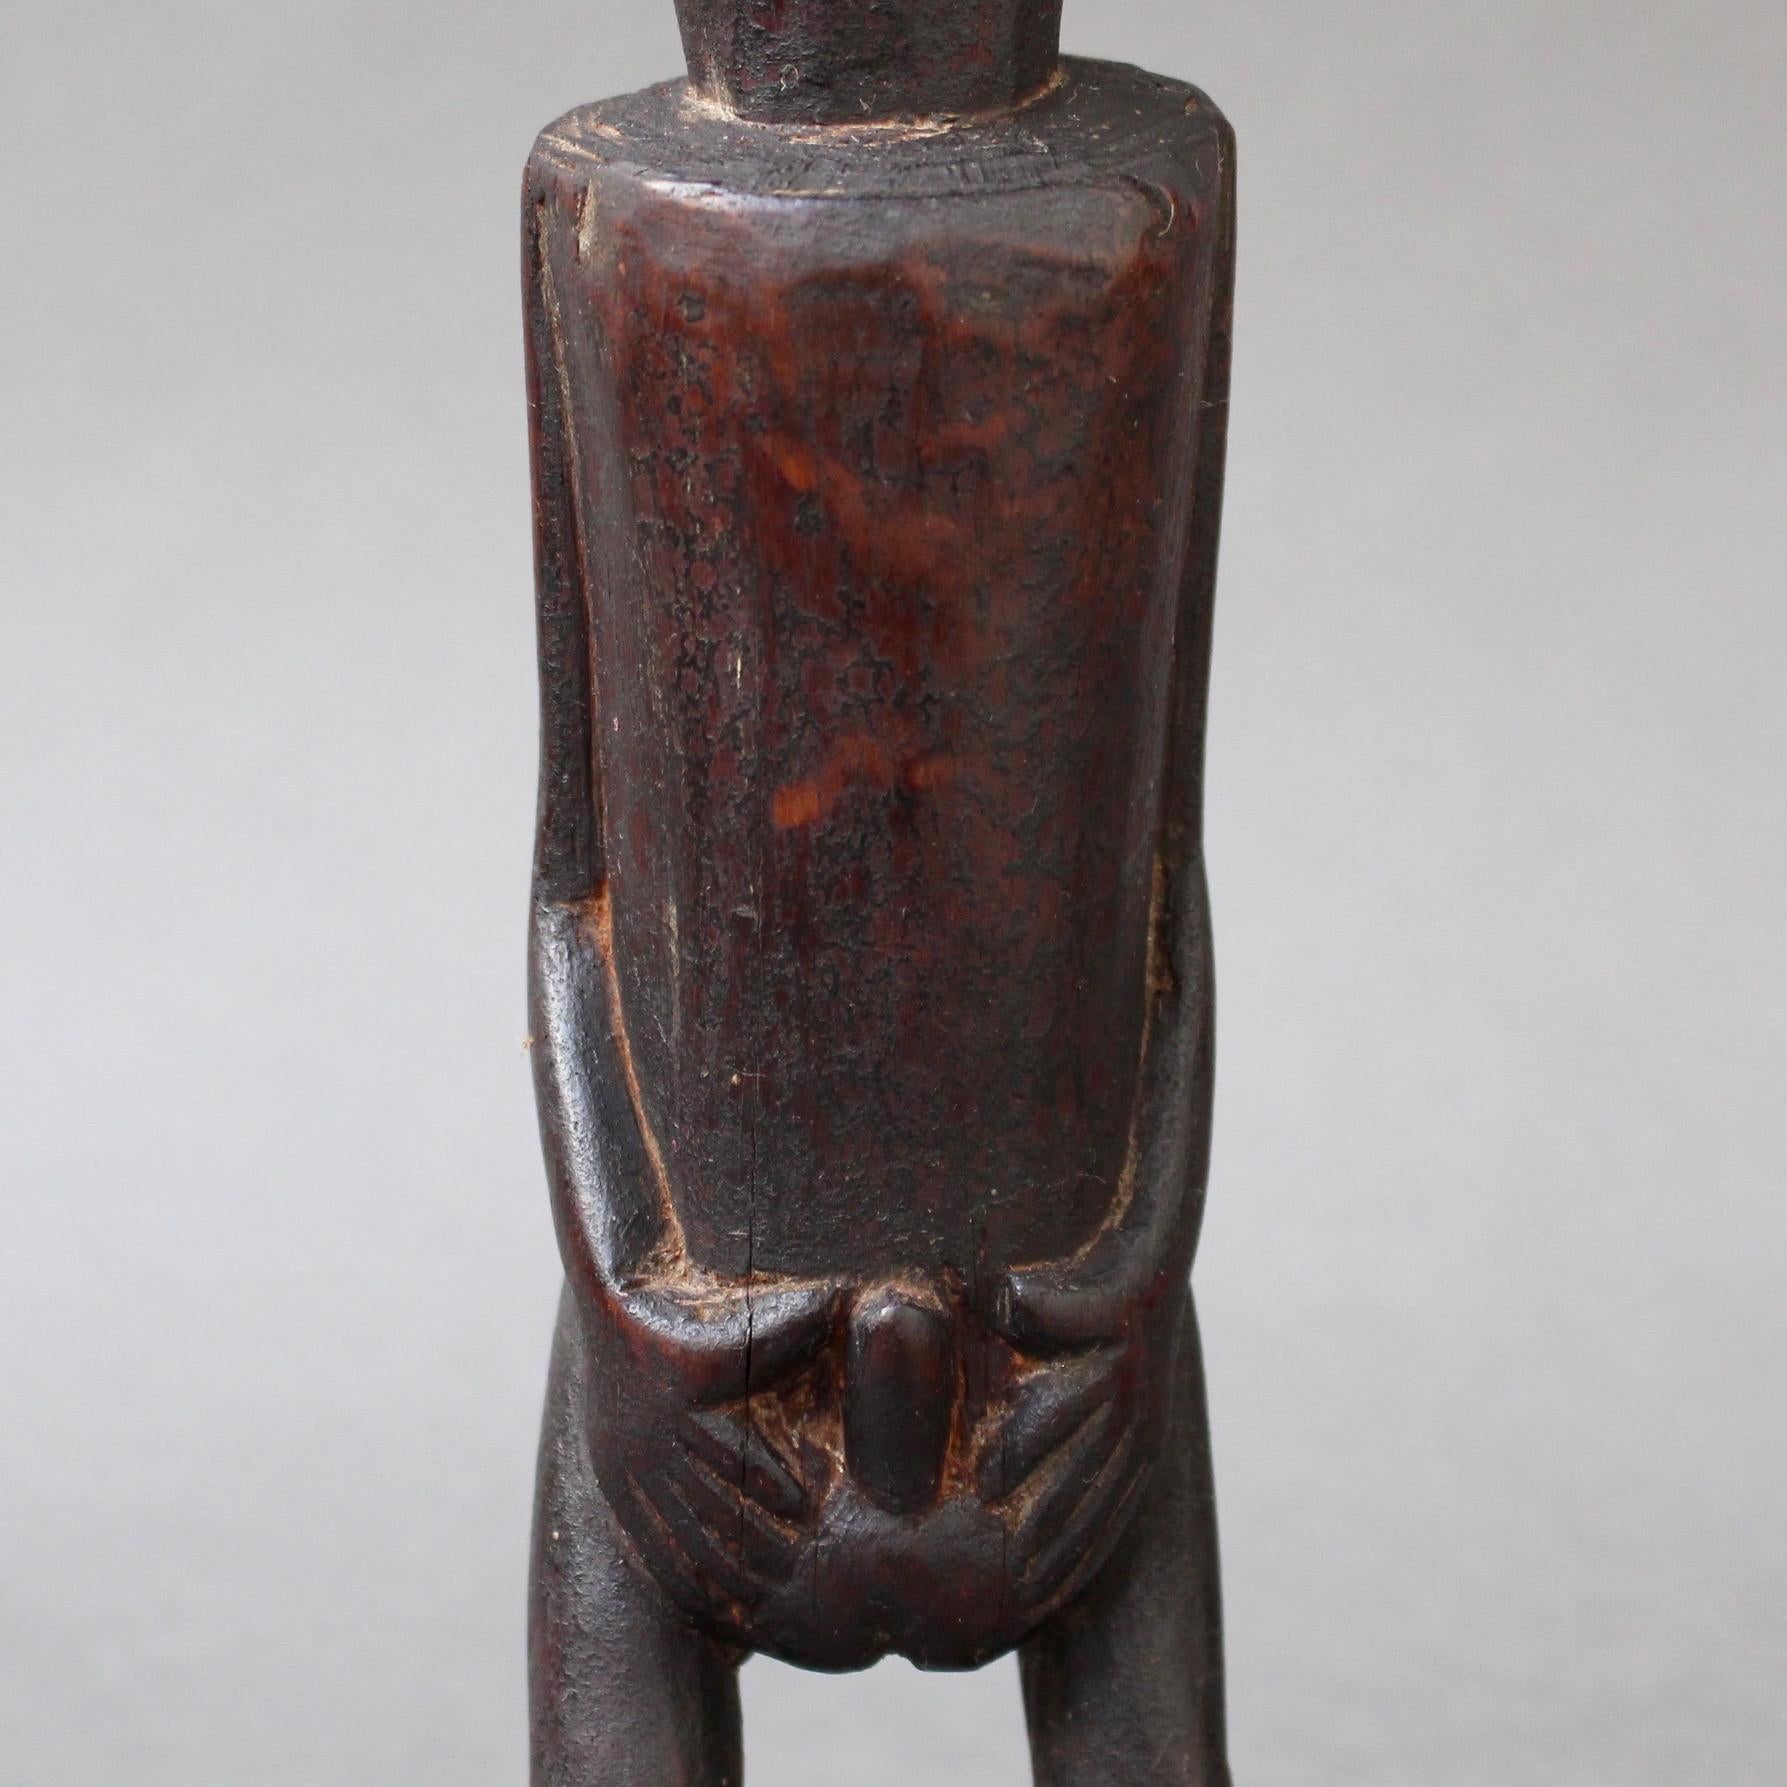 Wooden Sculpture or Carving of Fertility Figure from Sumba Island, Indonesia 2